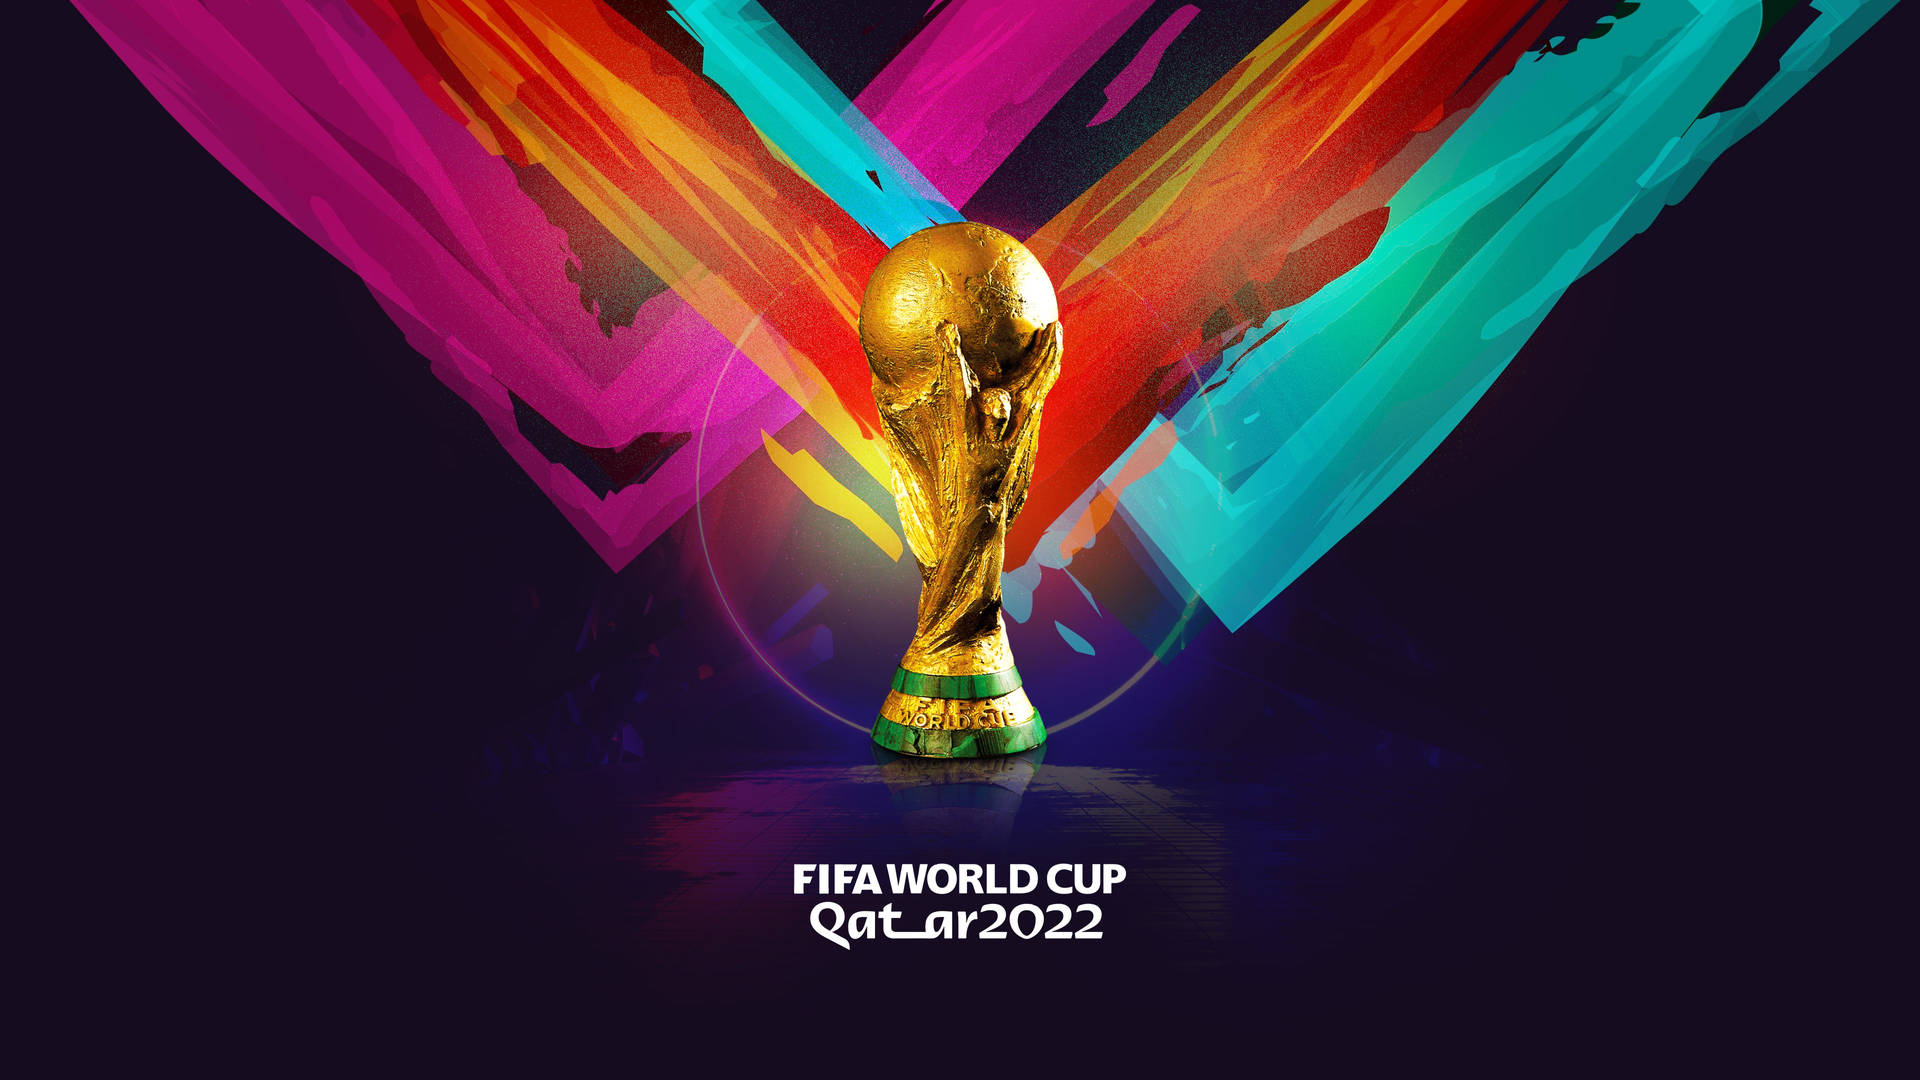 Gearing Up For an Unforgettable Fifa World Cup 2022 Wallpaper